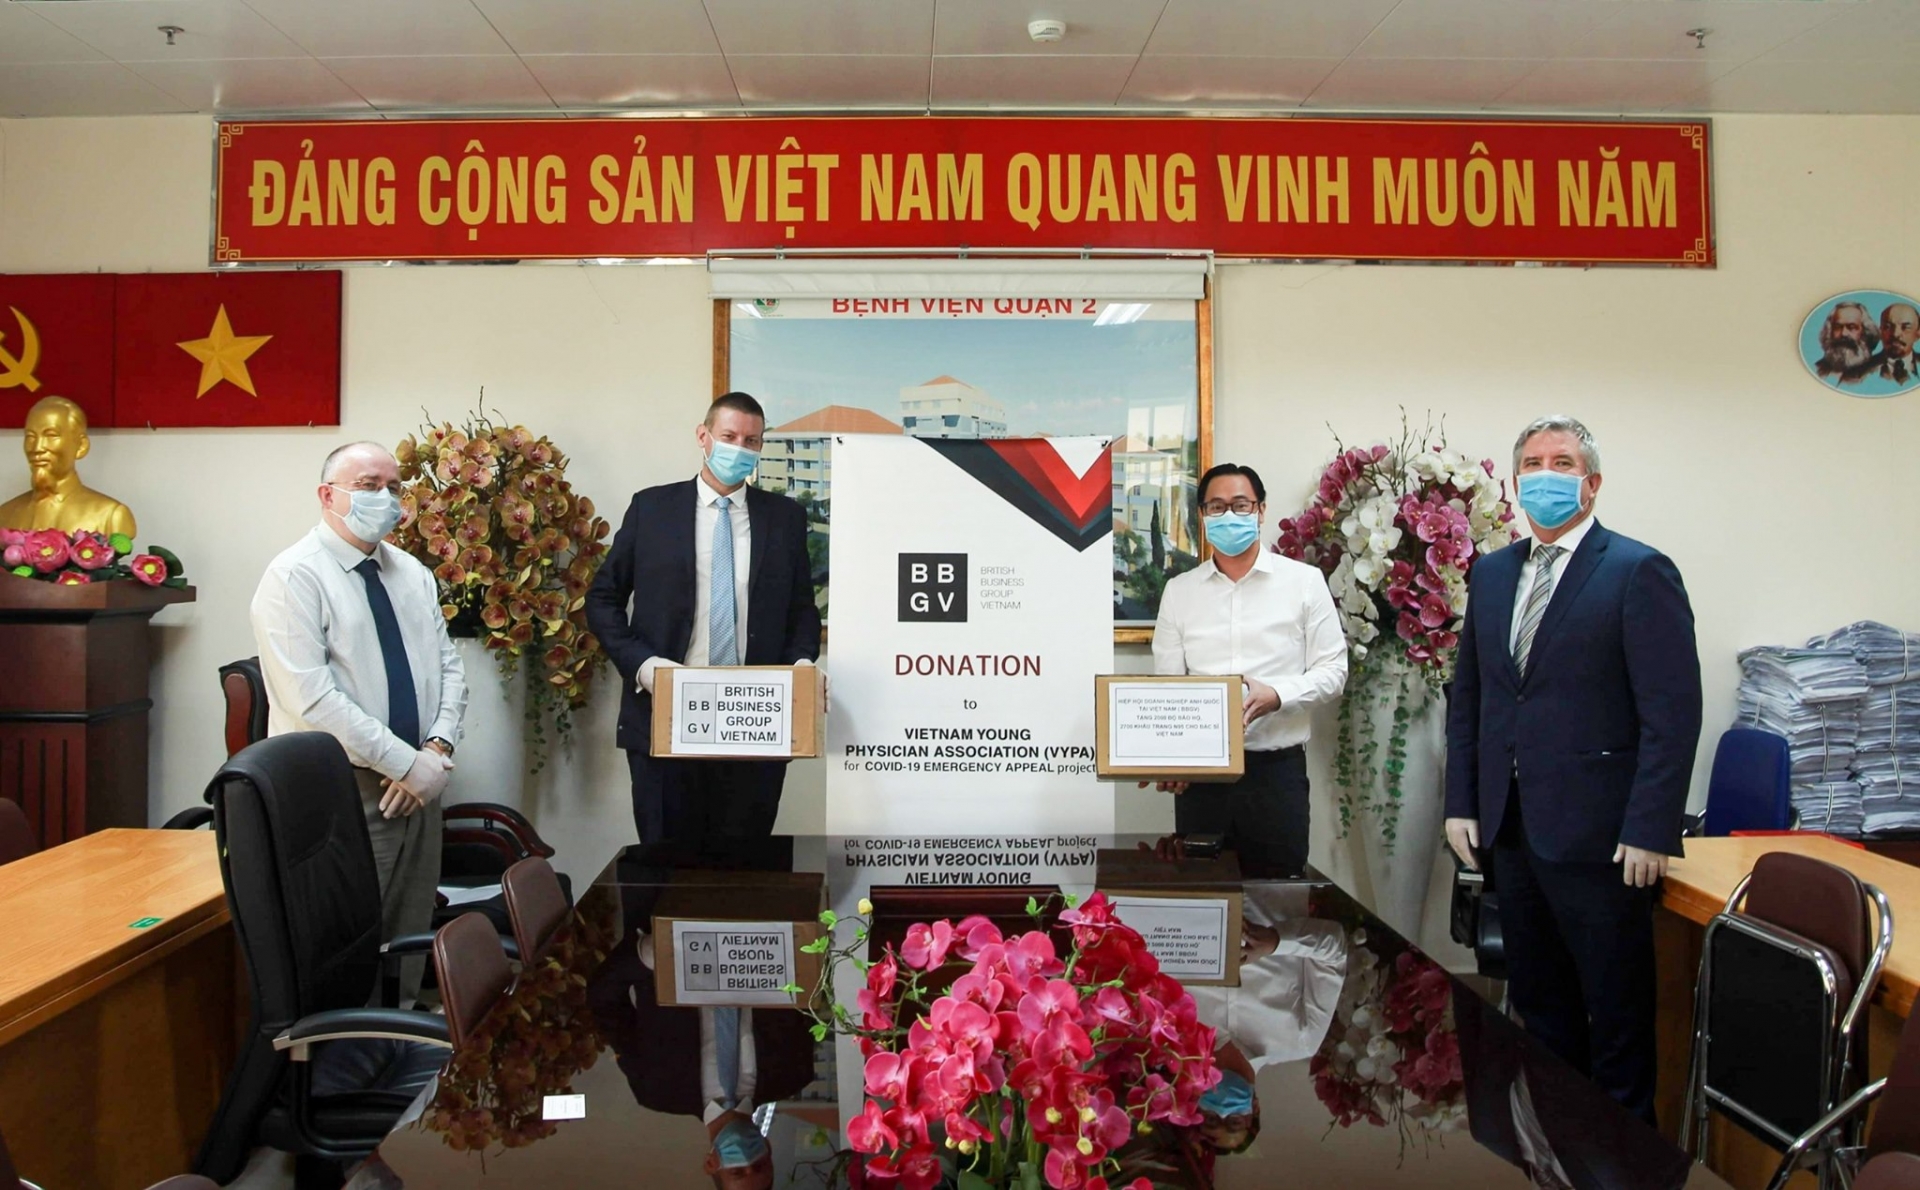 vietnam uk ties noted with timely sharing amid covid 19 crisis